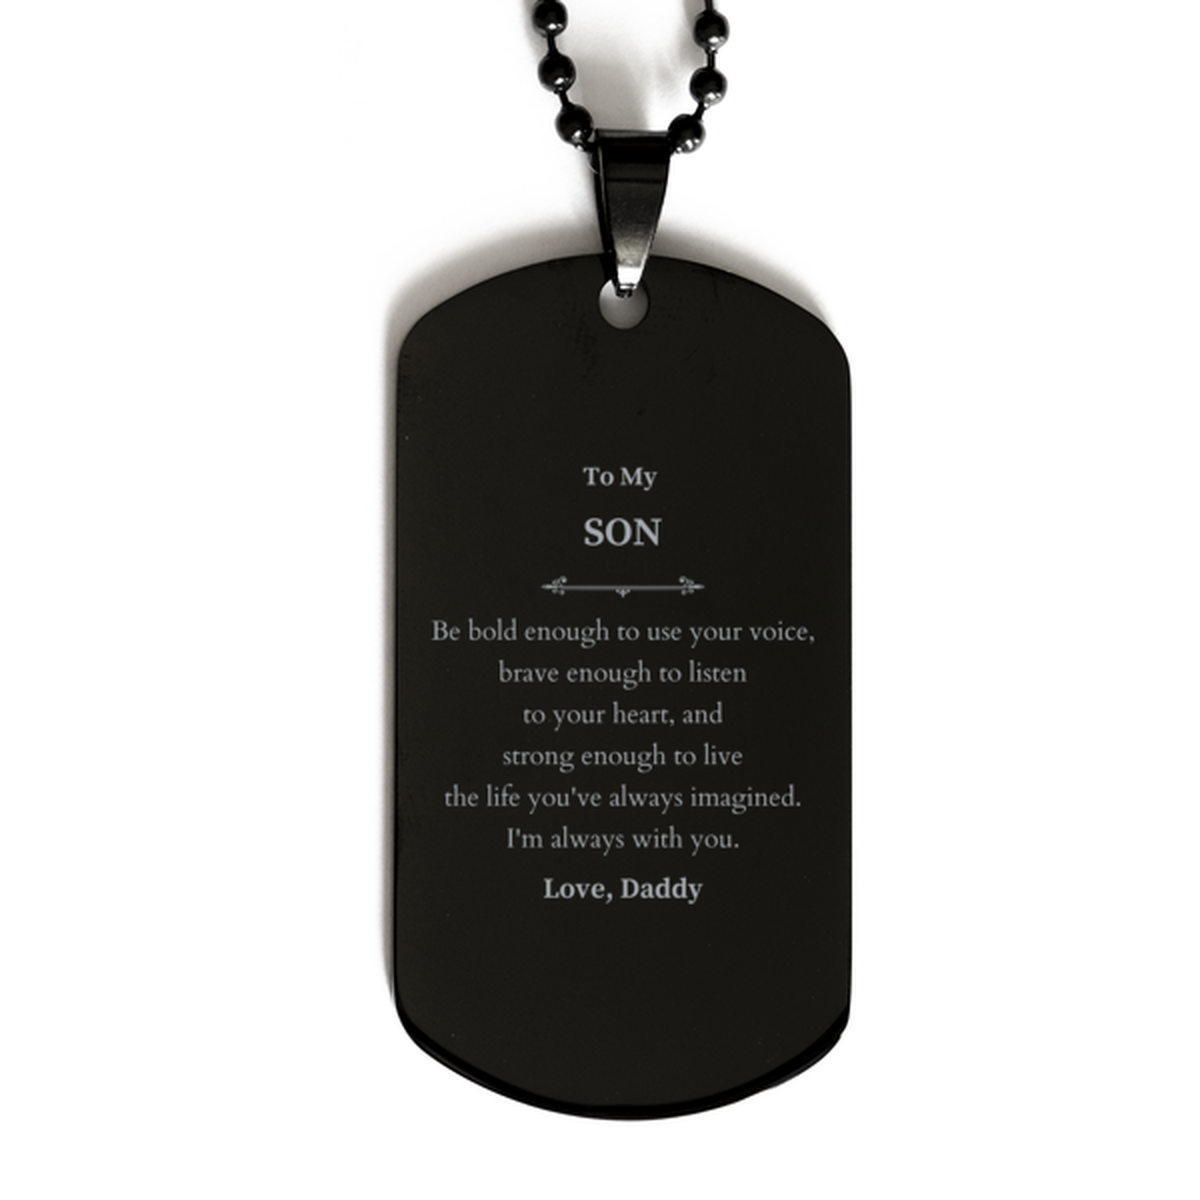 Keepsake Son Black Dog Tag Gift Idea Graduation Christmas Birthday Son from Daddy, Son Be bold enough to use your voice, brave enough to listen to your heart. Love, Daddy